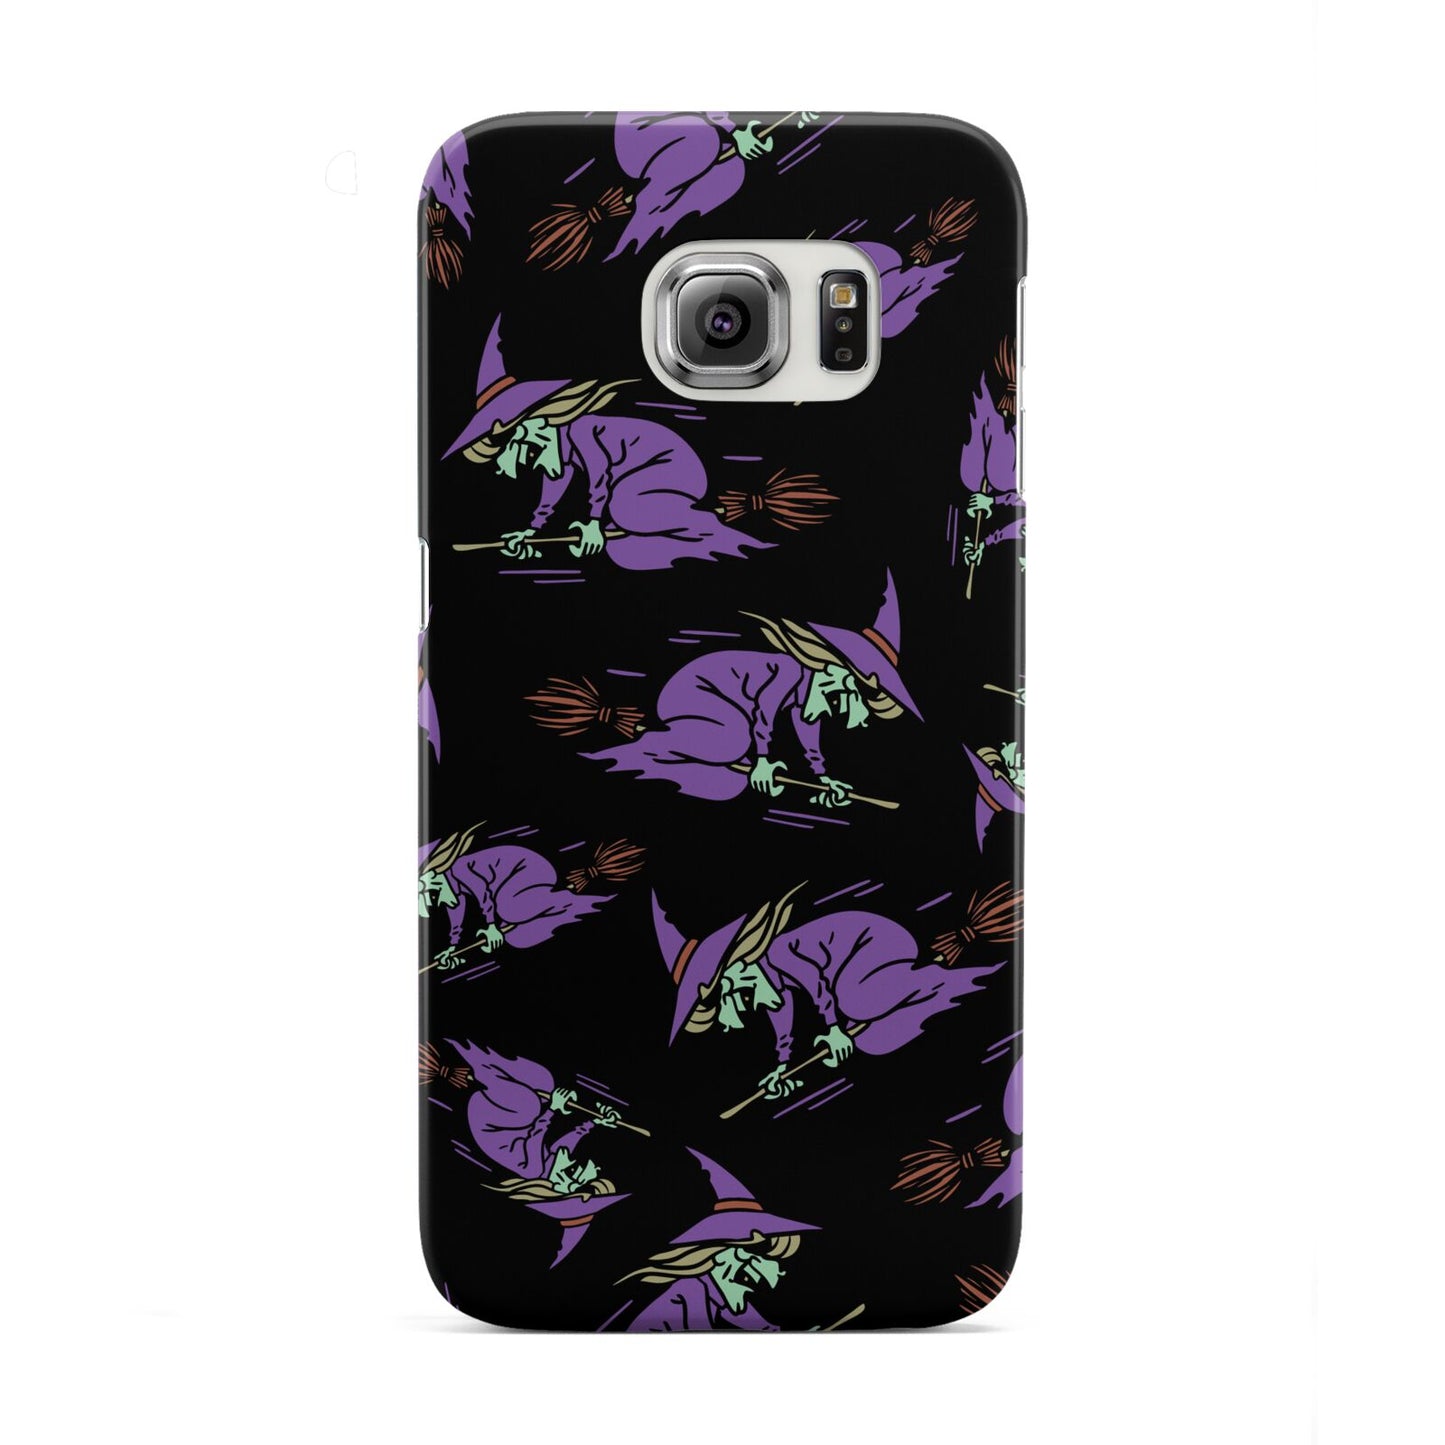 Flying Witches Samsung Galaxy S6 Edge Case